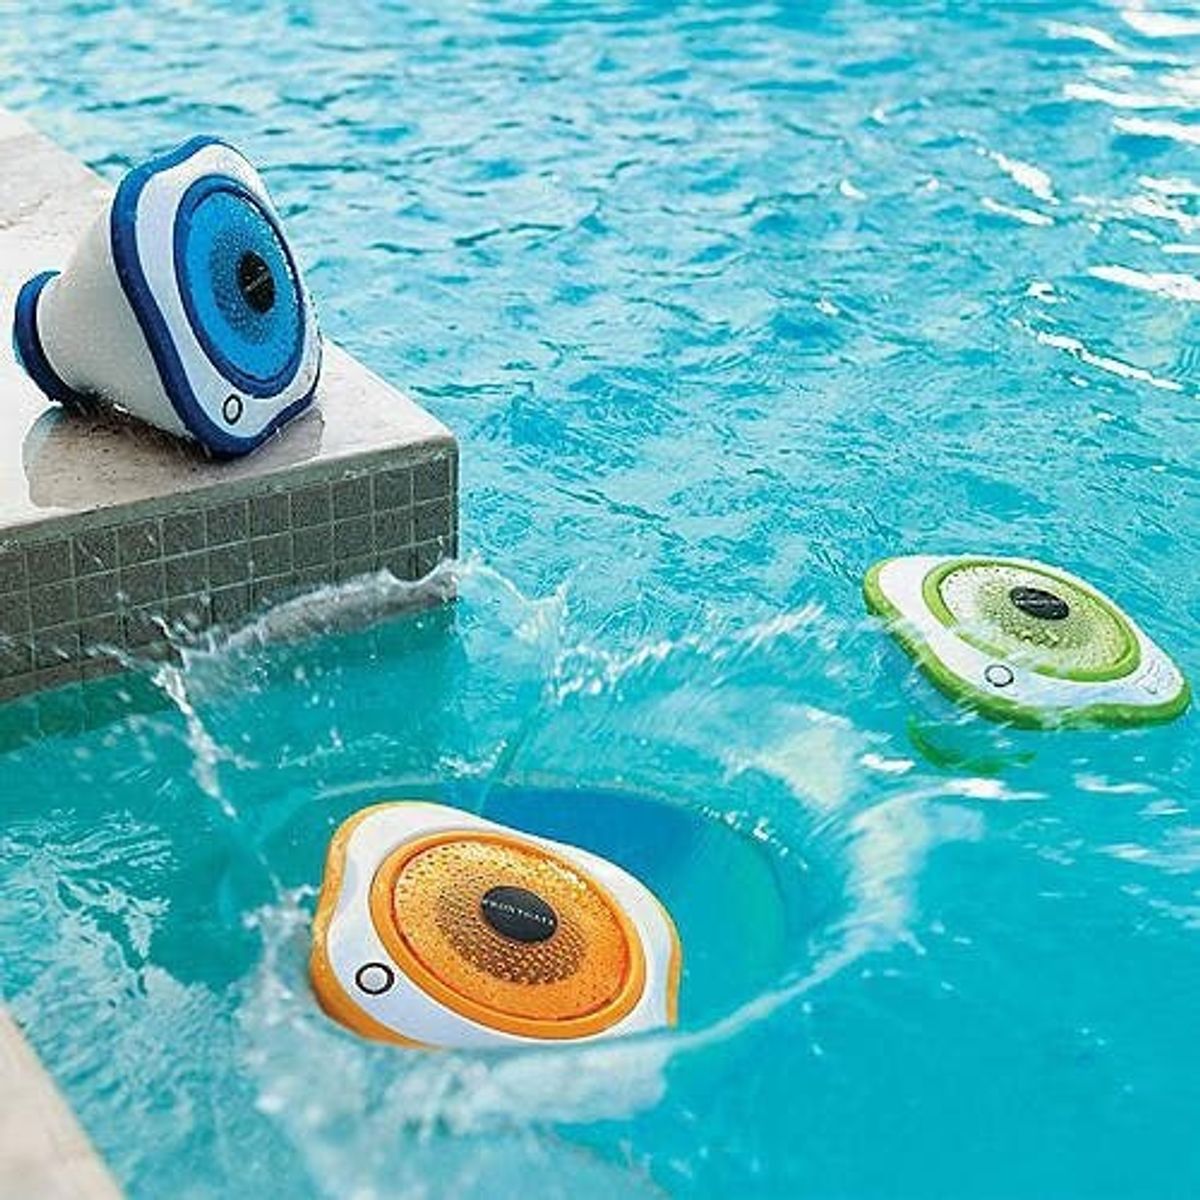 These Floating LED Speakers Are Sure to Light Up Your Next Pool Party